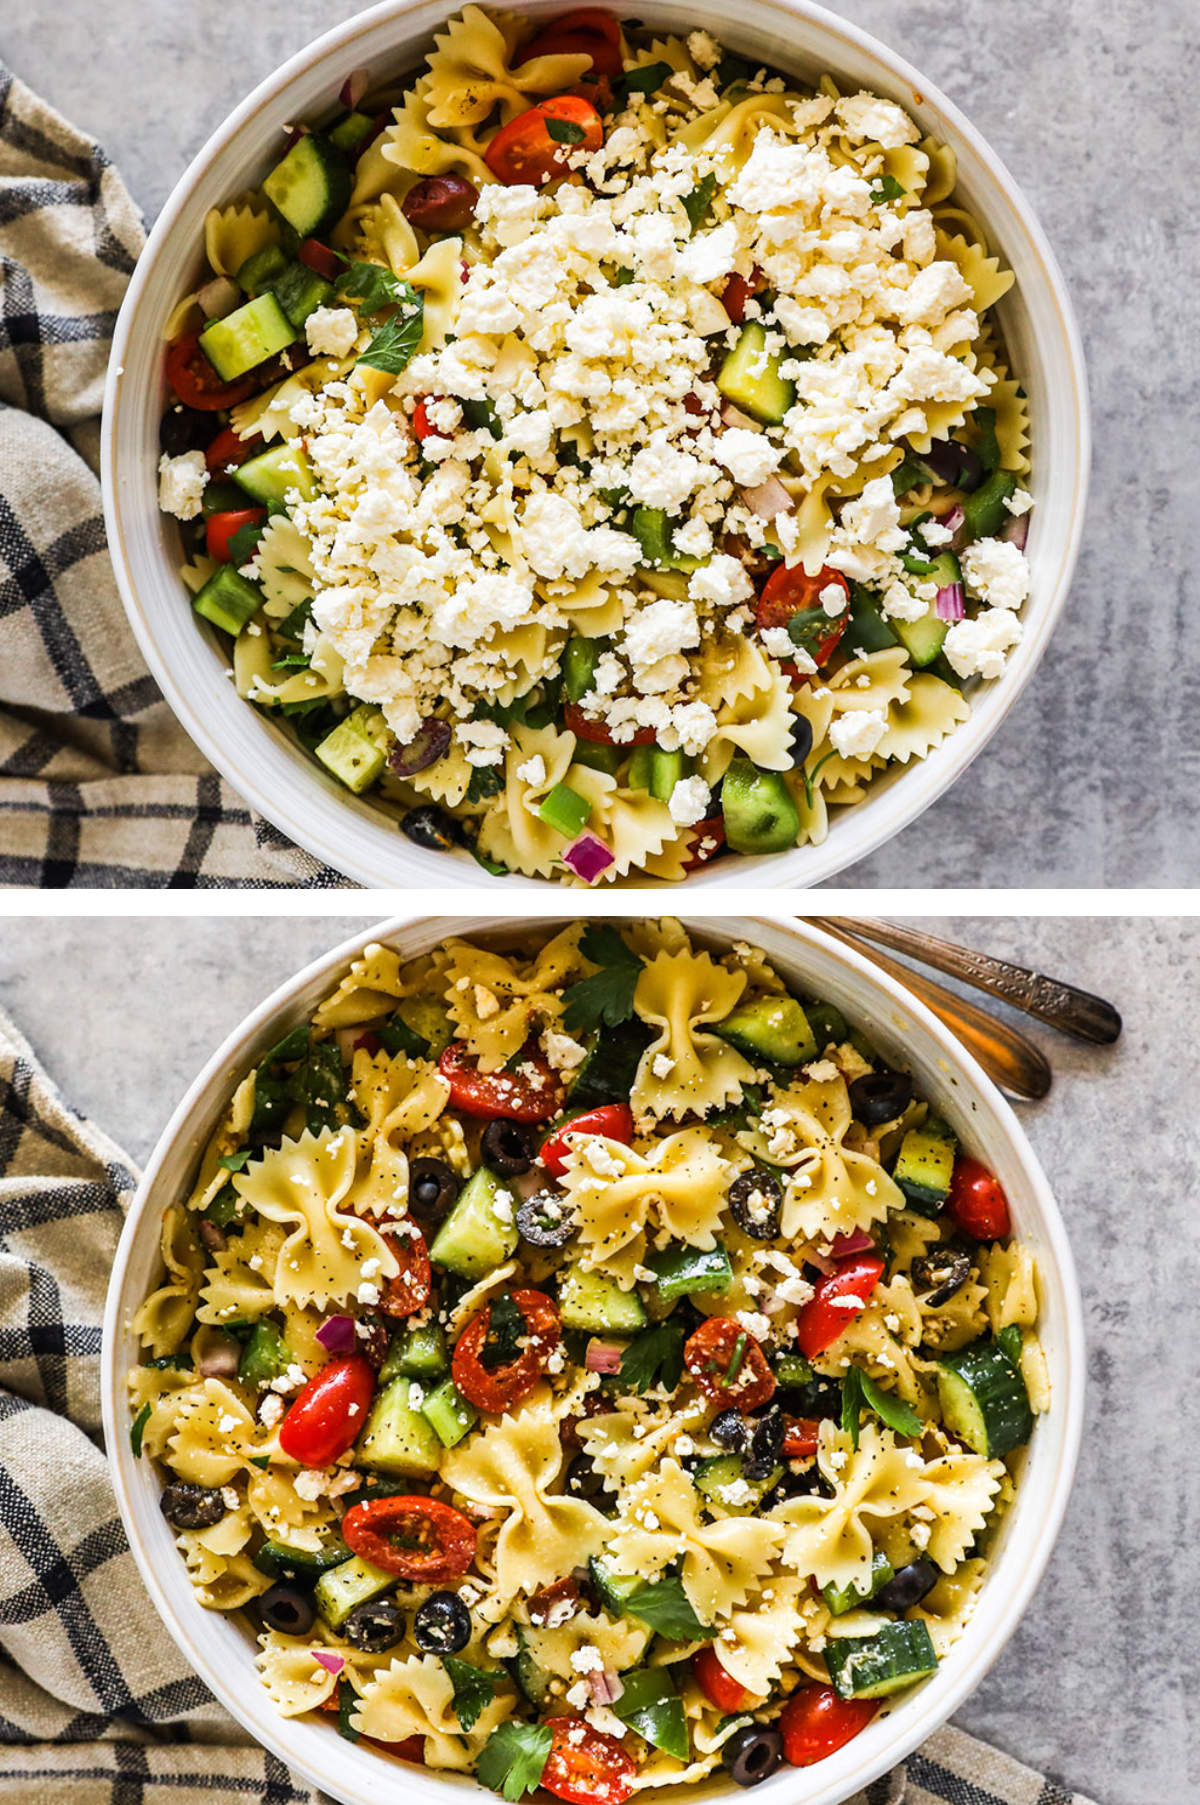 Two overhead images in one. 1. Crumbled feta on top of salad. 2. Feta mixed in with all other ingredients. 